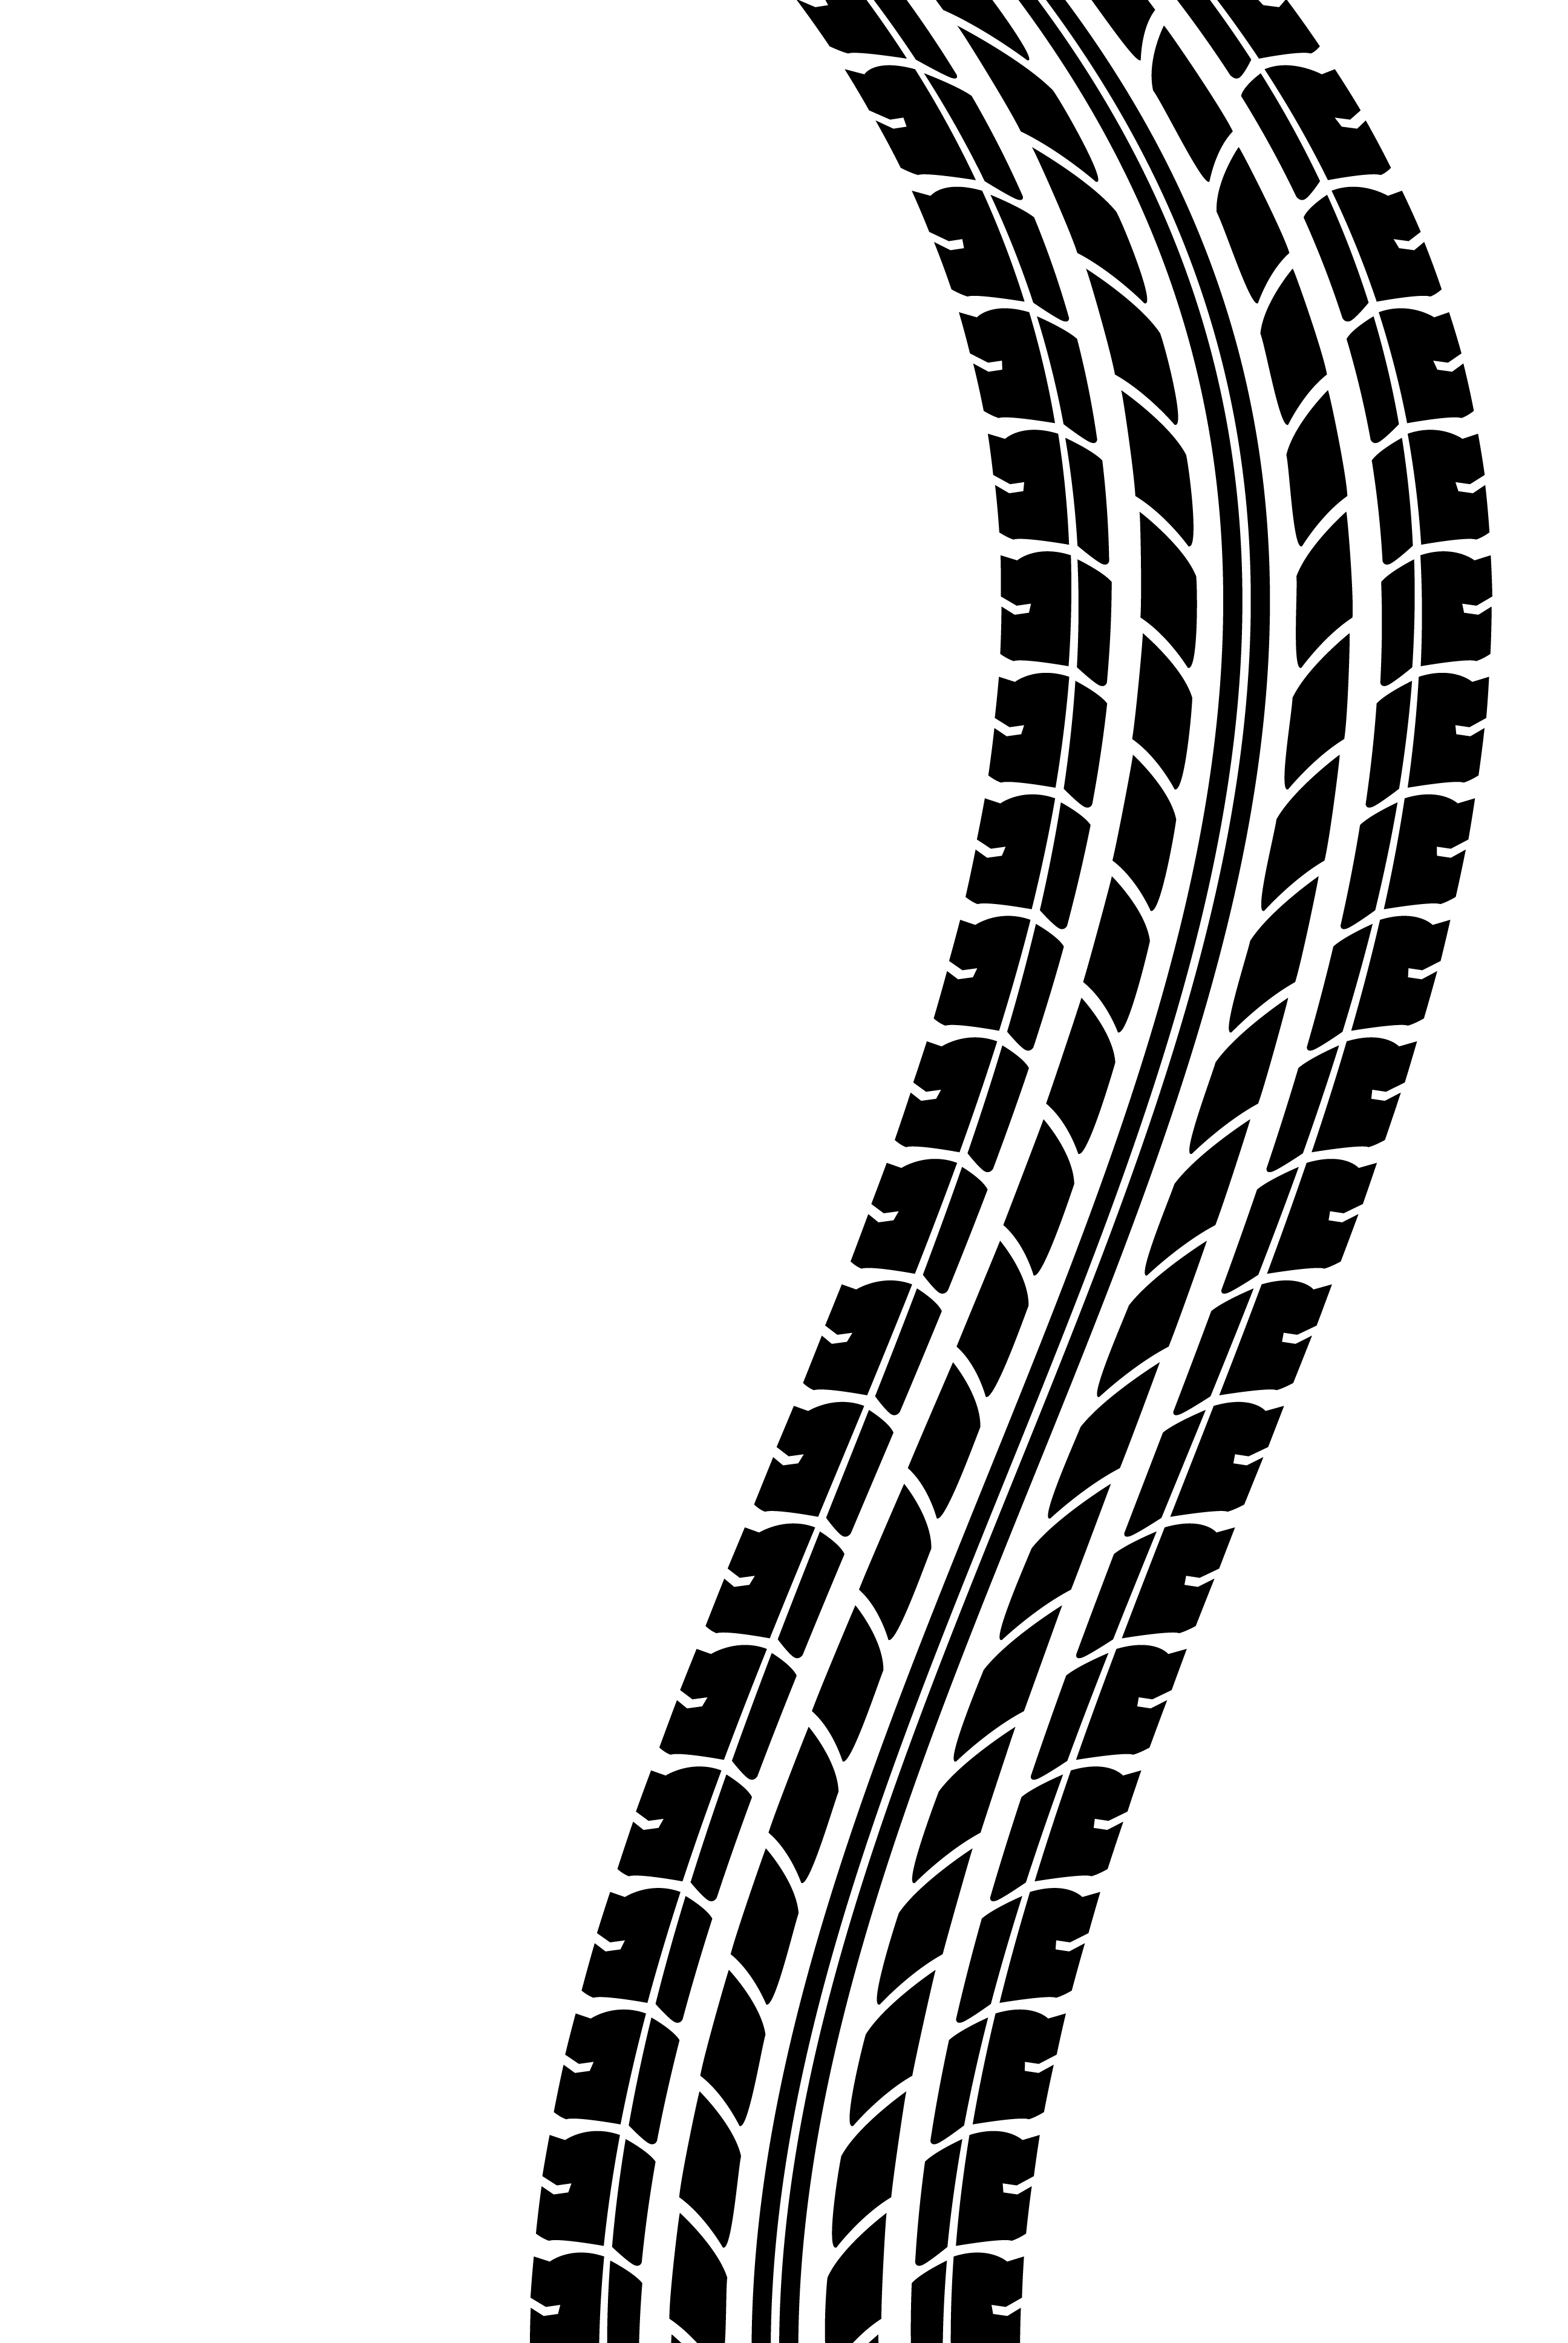 Tire Pictures - Clipart library